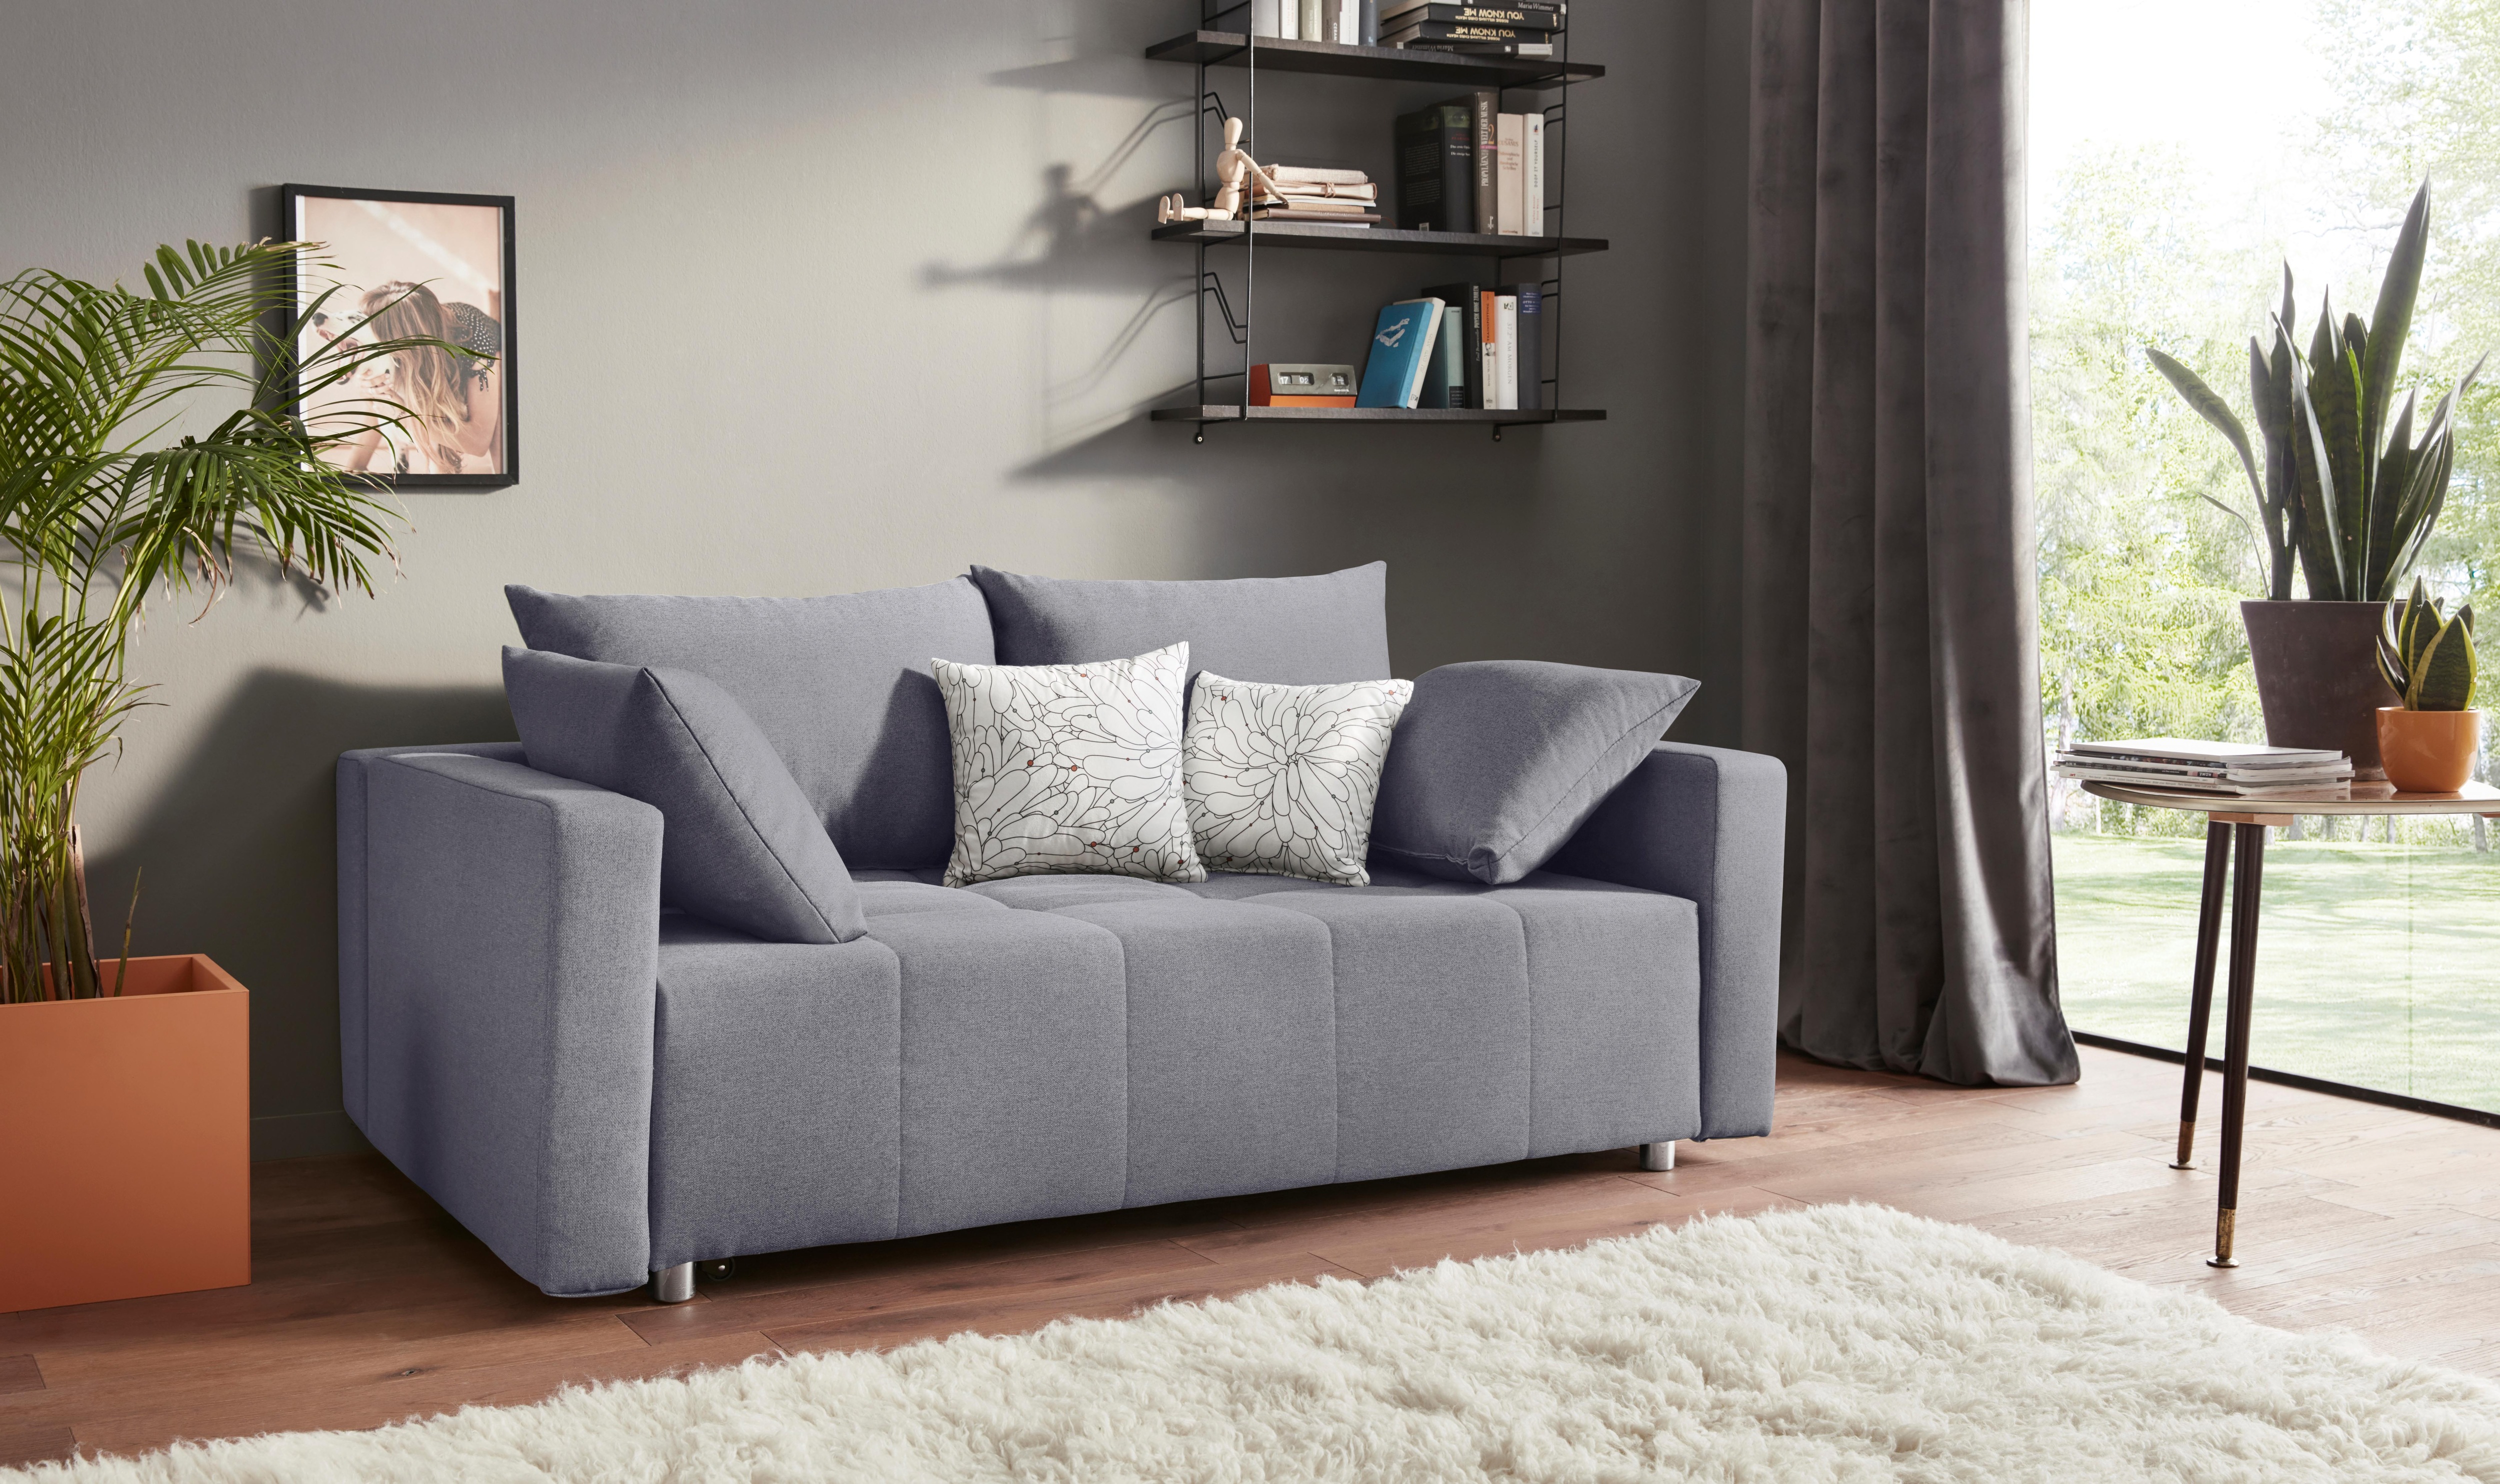 COLLECTION AB Schlafsofa "Dany" 2